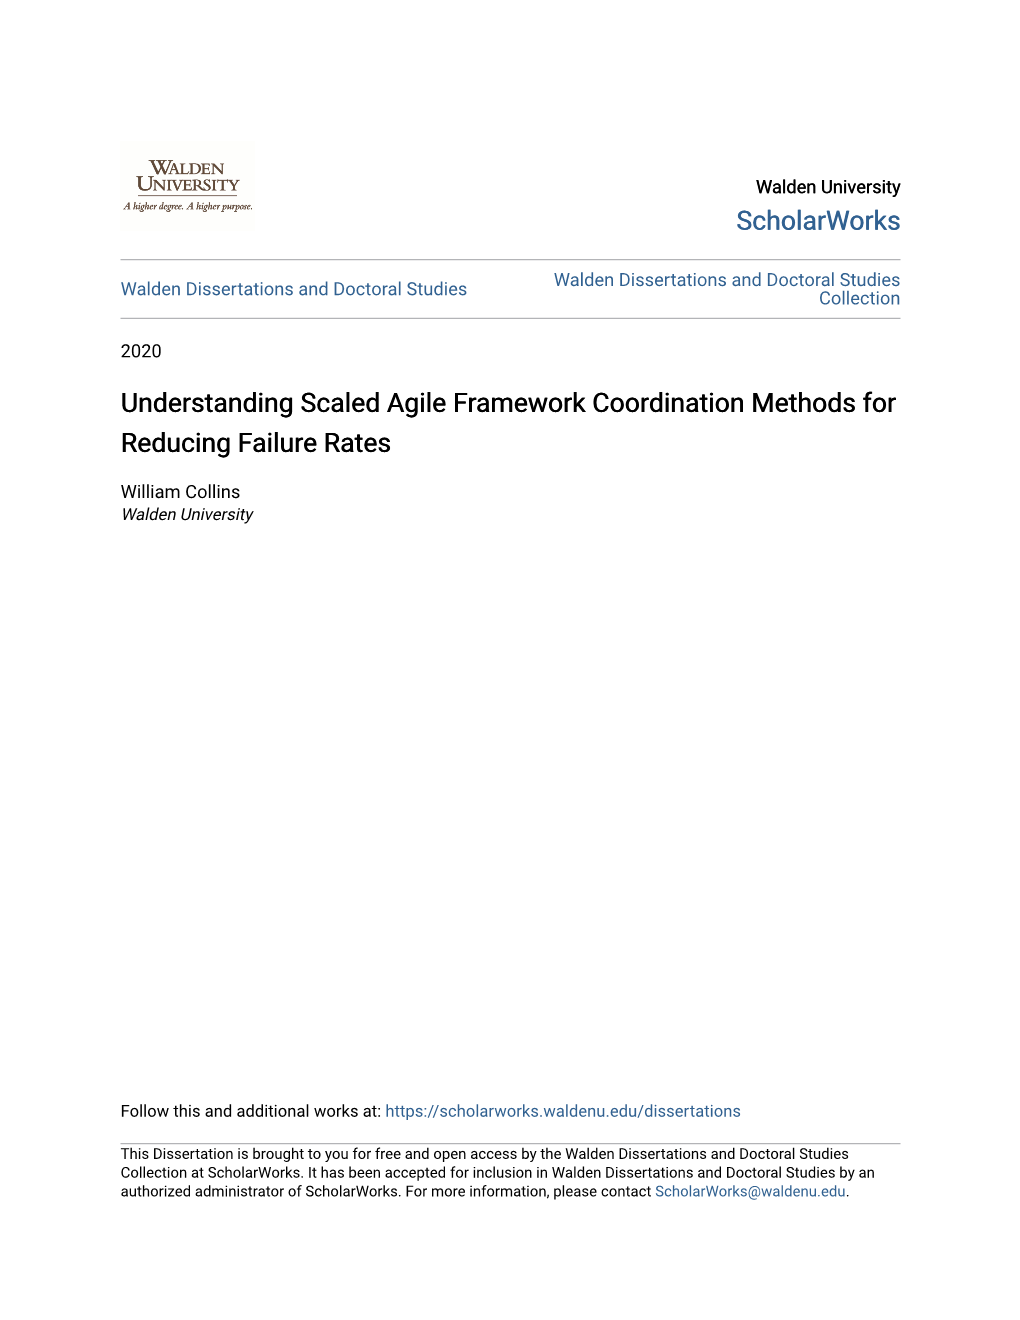 Understanding Scaled Agile Framework Coordination Methods for Reducing Failure Rates